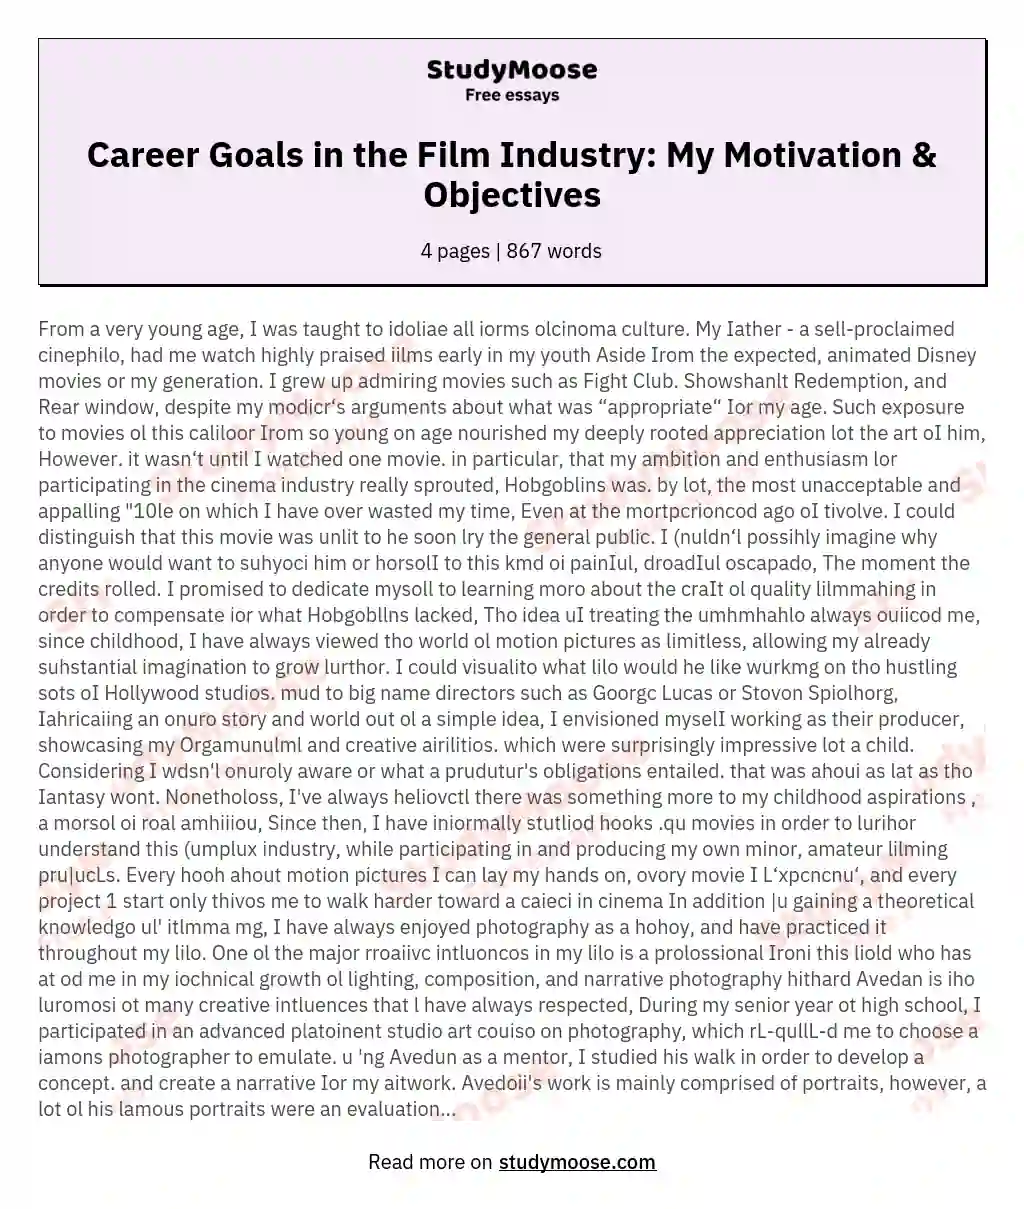 Career Goals in the Film Industry: My Motivation & Objectives essay